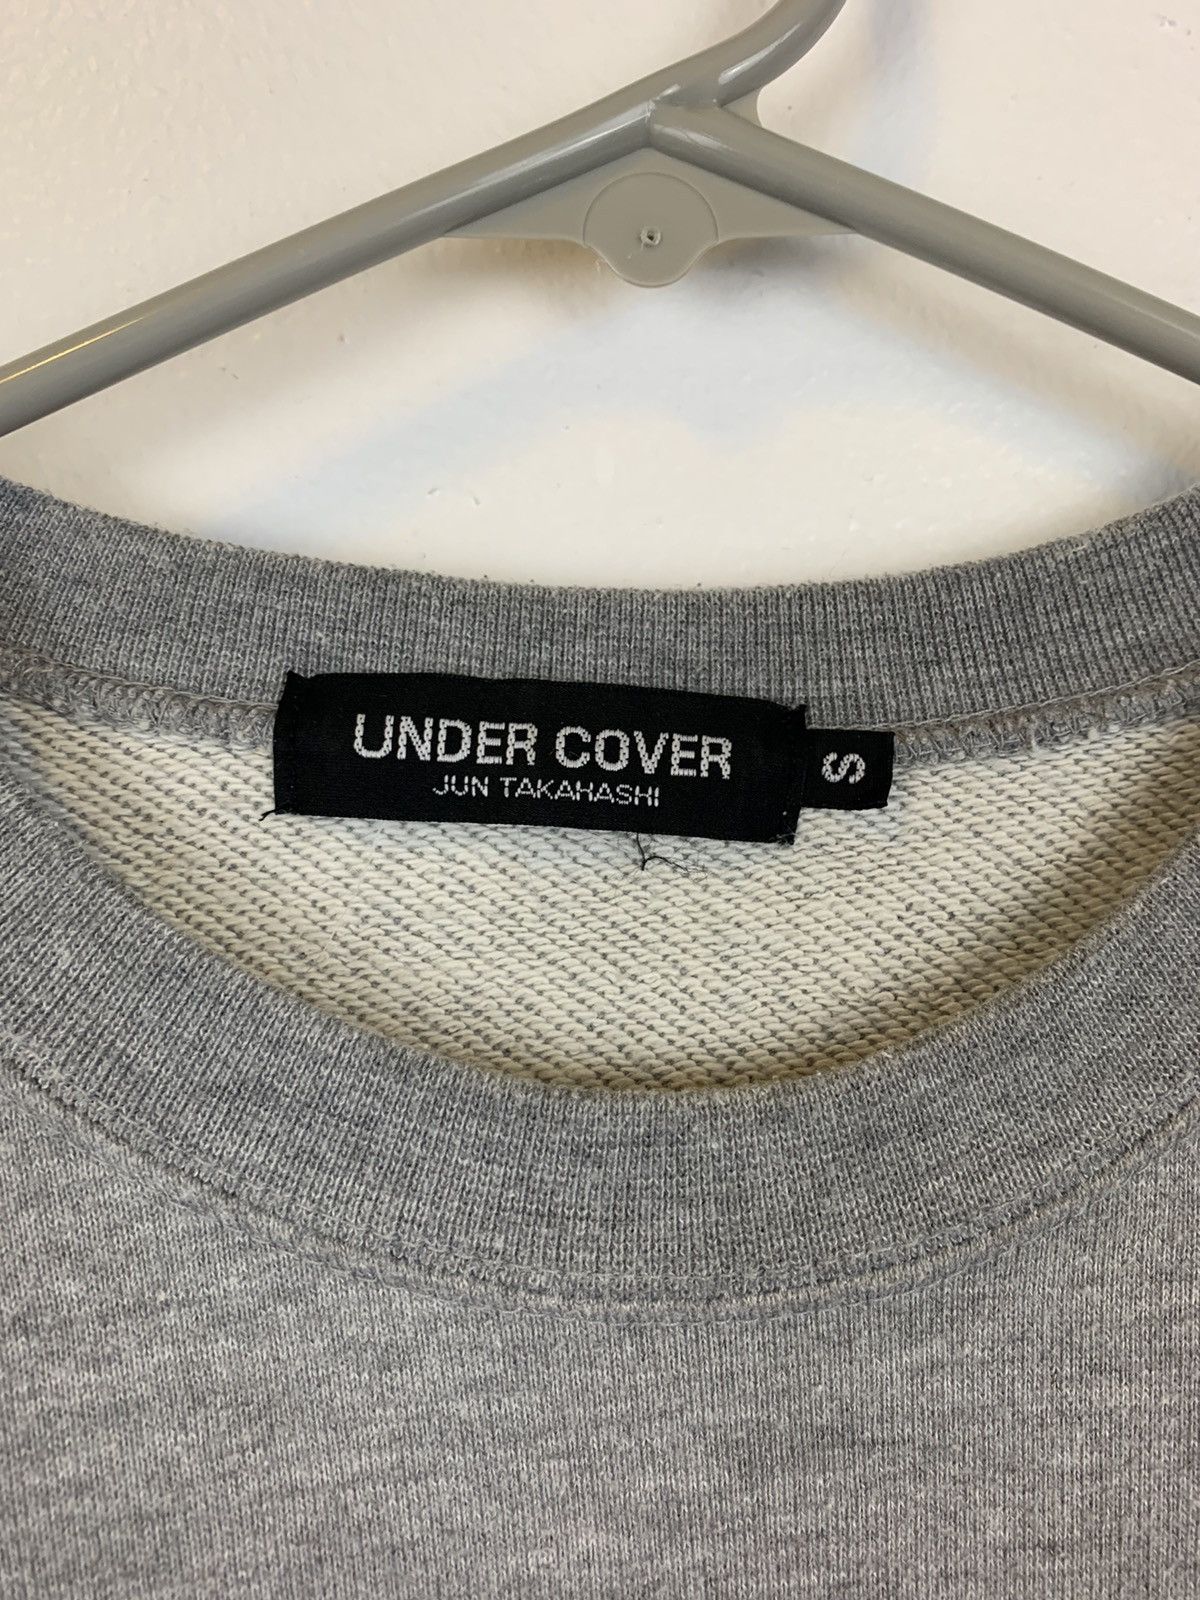 Undercover Undercover bear sweater Size US S / EU 44-46 / 1 - 2 Preview